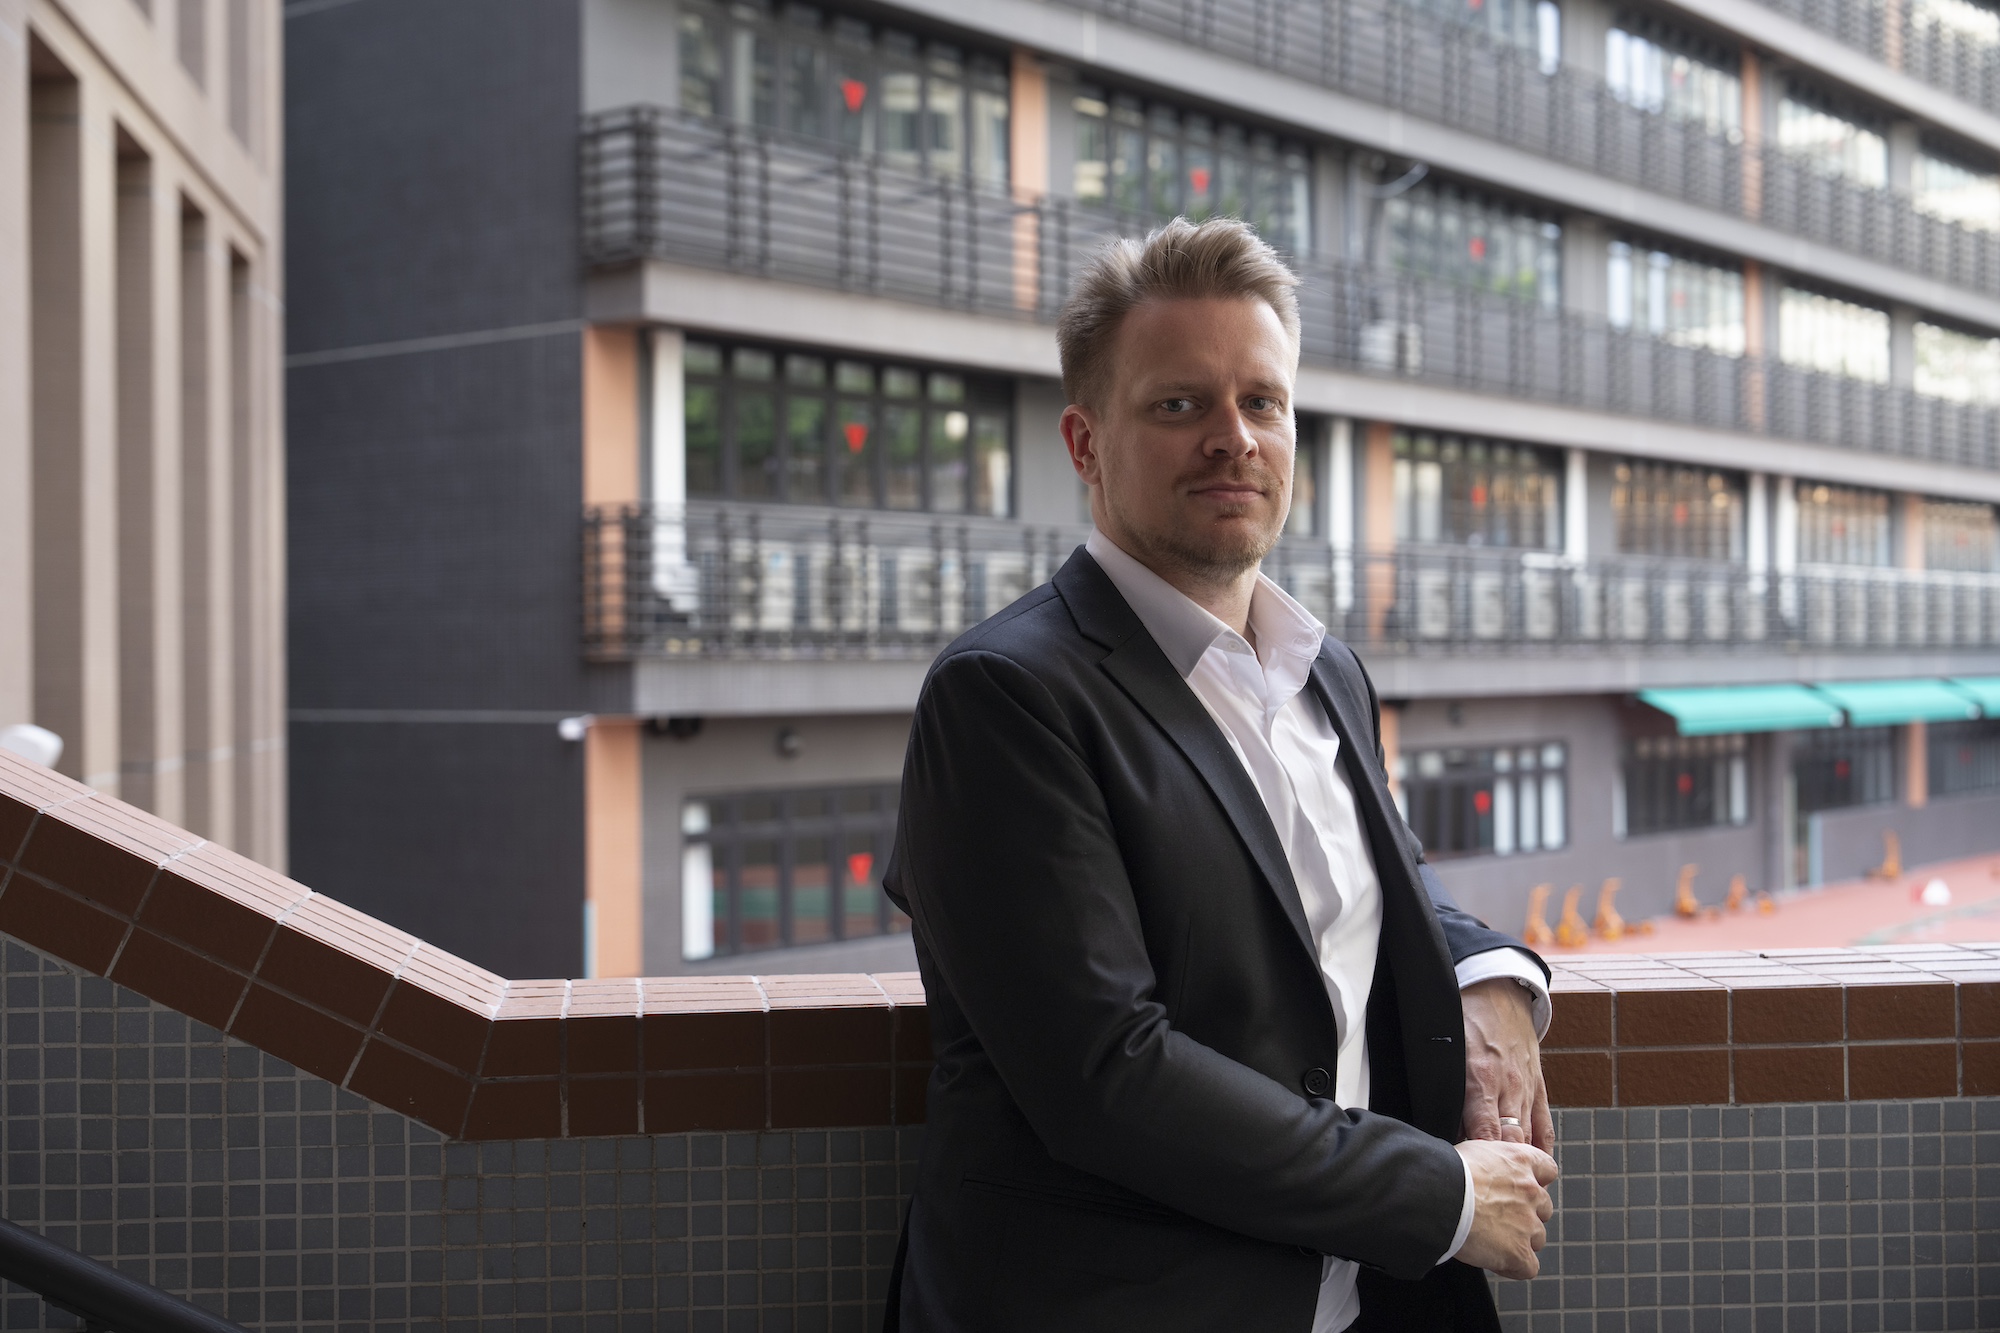 Finnish-born Pekka Eksyma heads the innovative new school, based on a system developed in his homeland